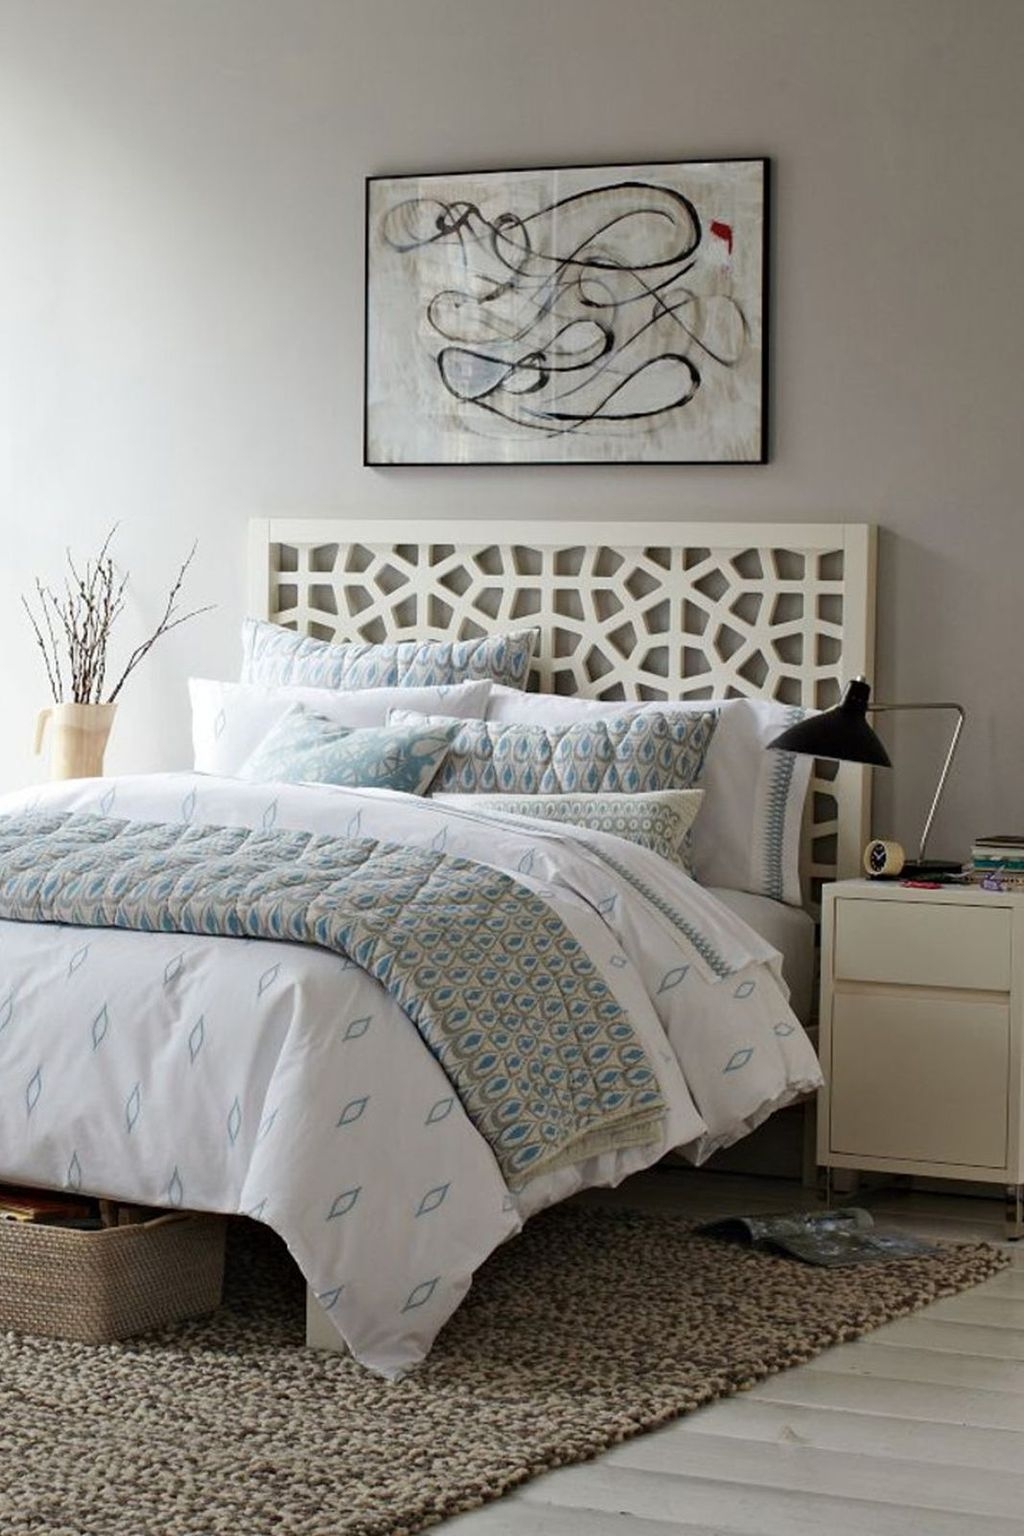 Incredible Headboard Design For Your Bedroom Inspiration 28